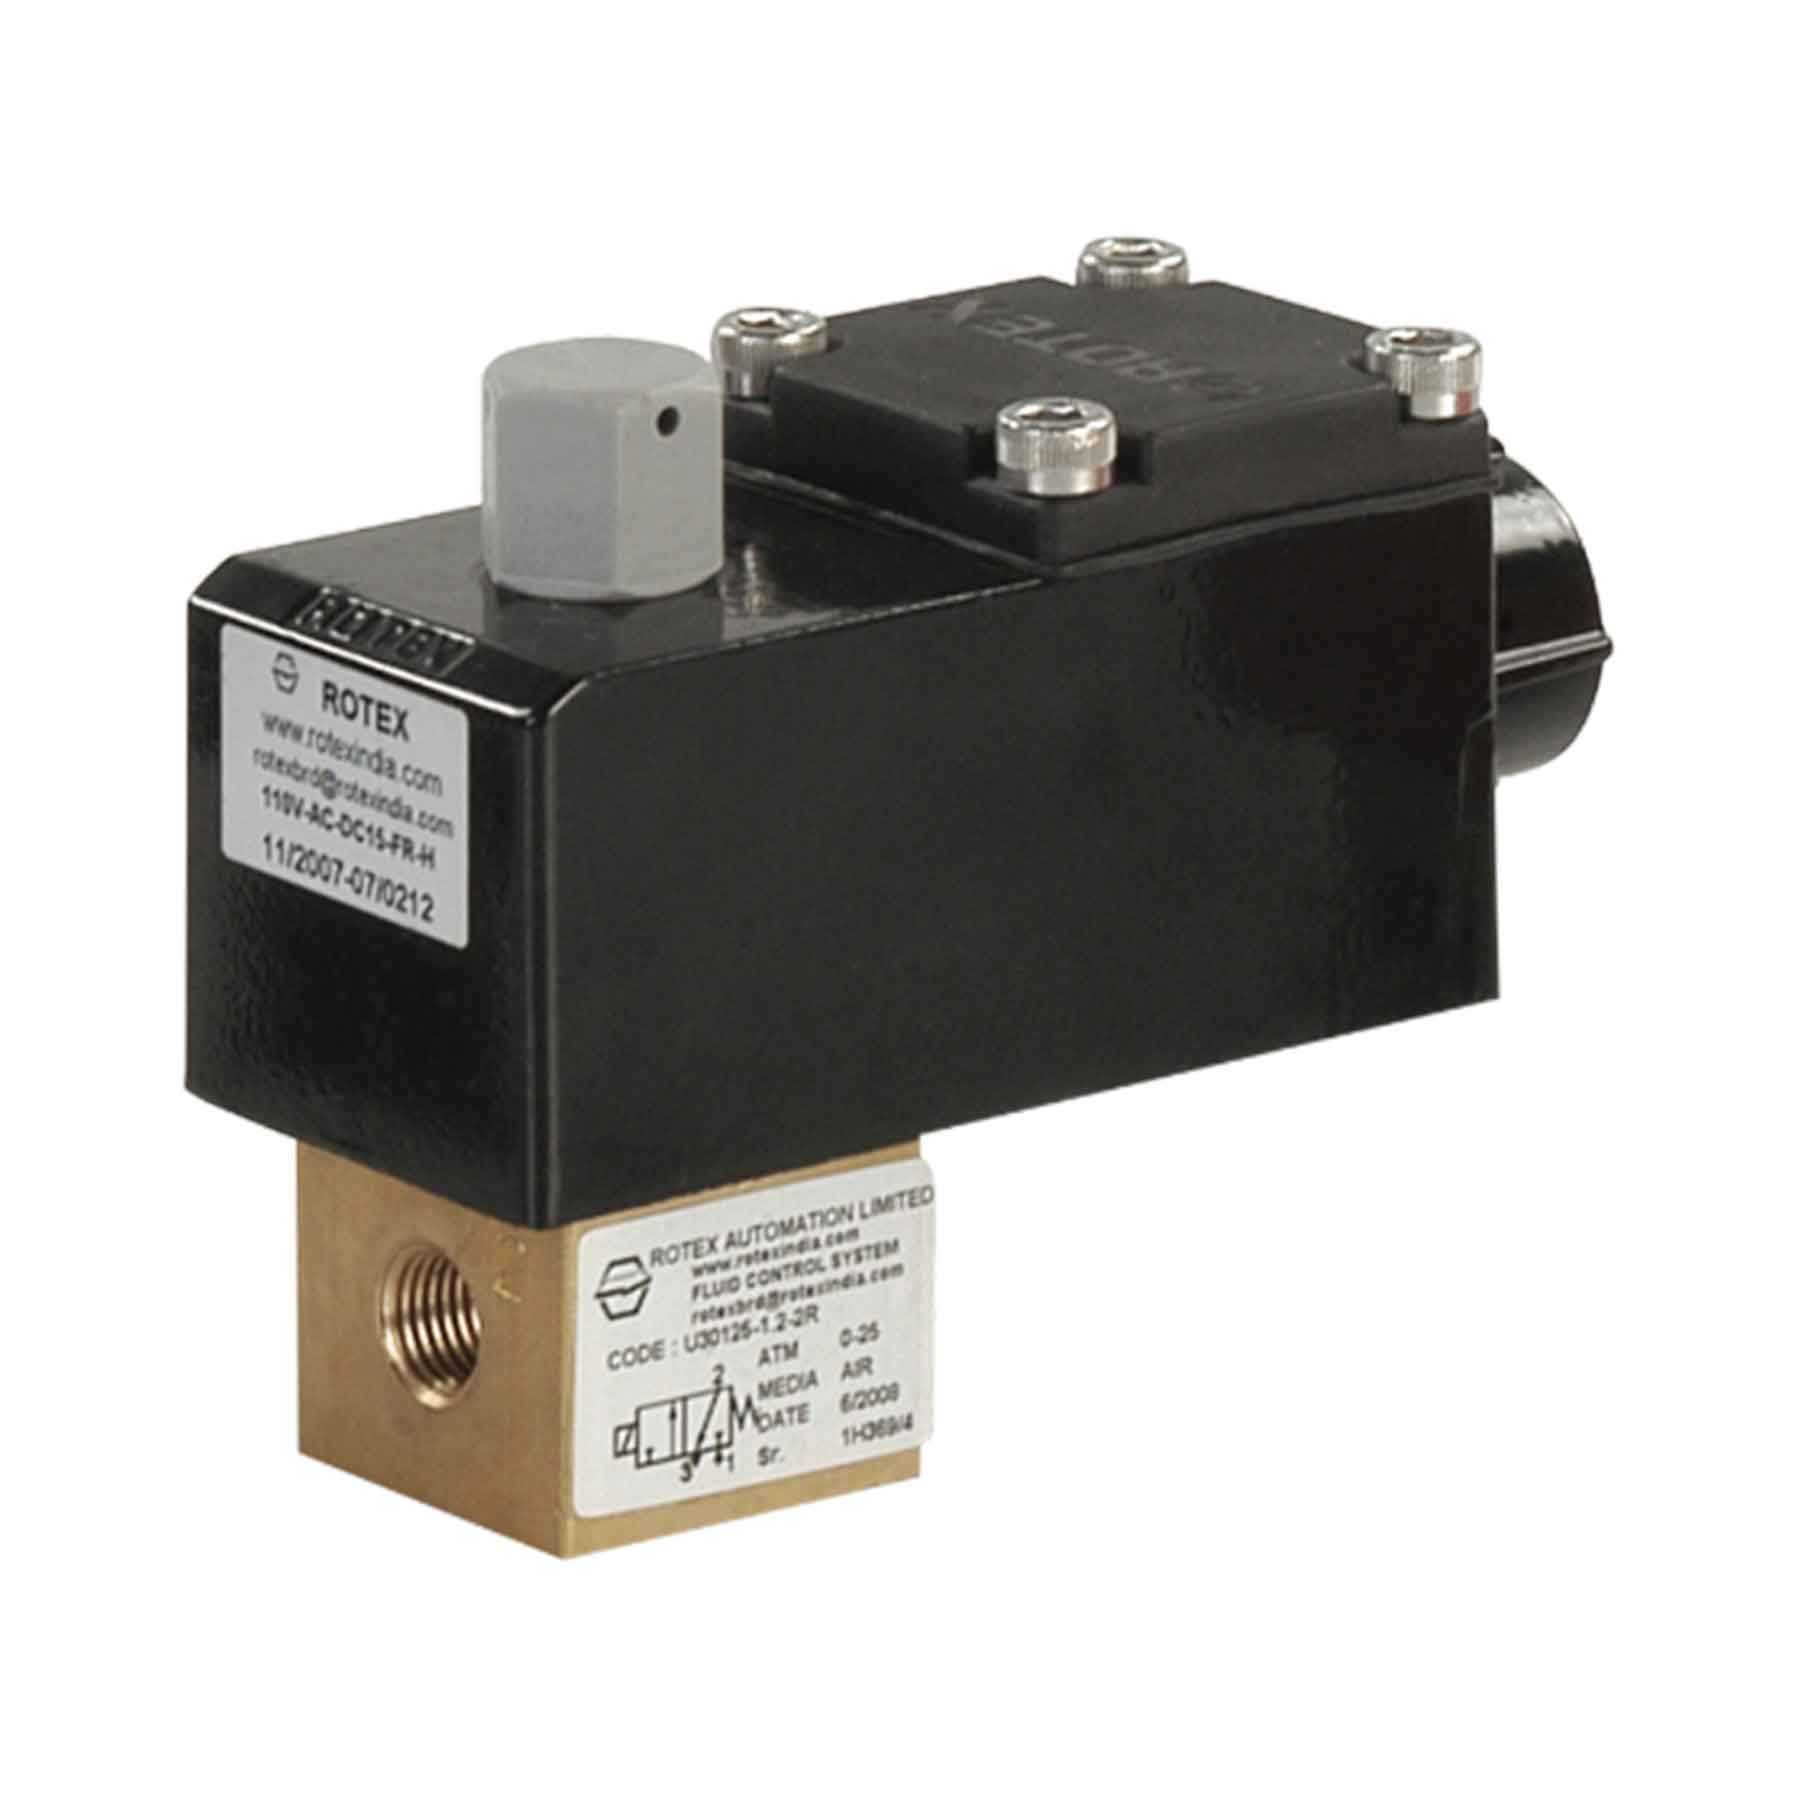 Rotex 2/2-Way Normally Closed Direct Lift Solenoid Valve 20101-3-2R+III-24V-DC-66-NS-H01